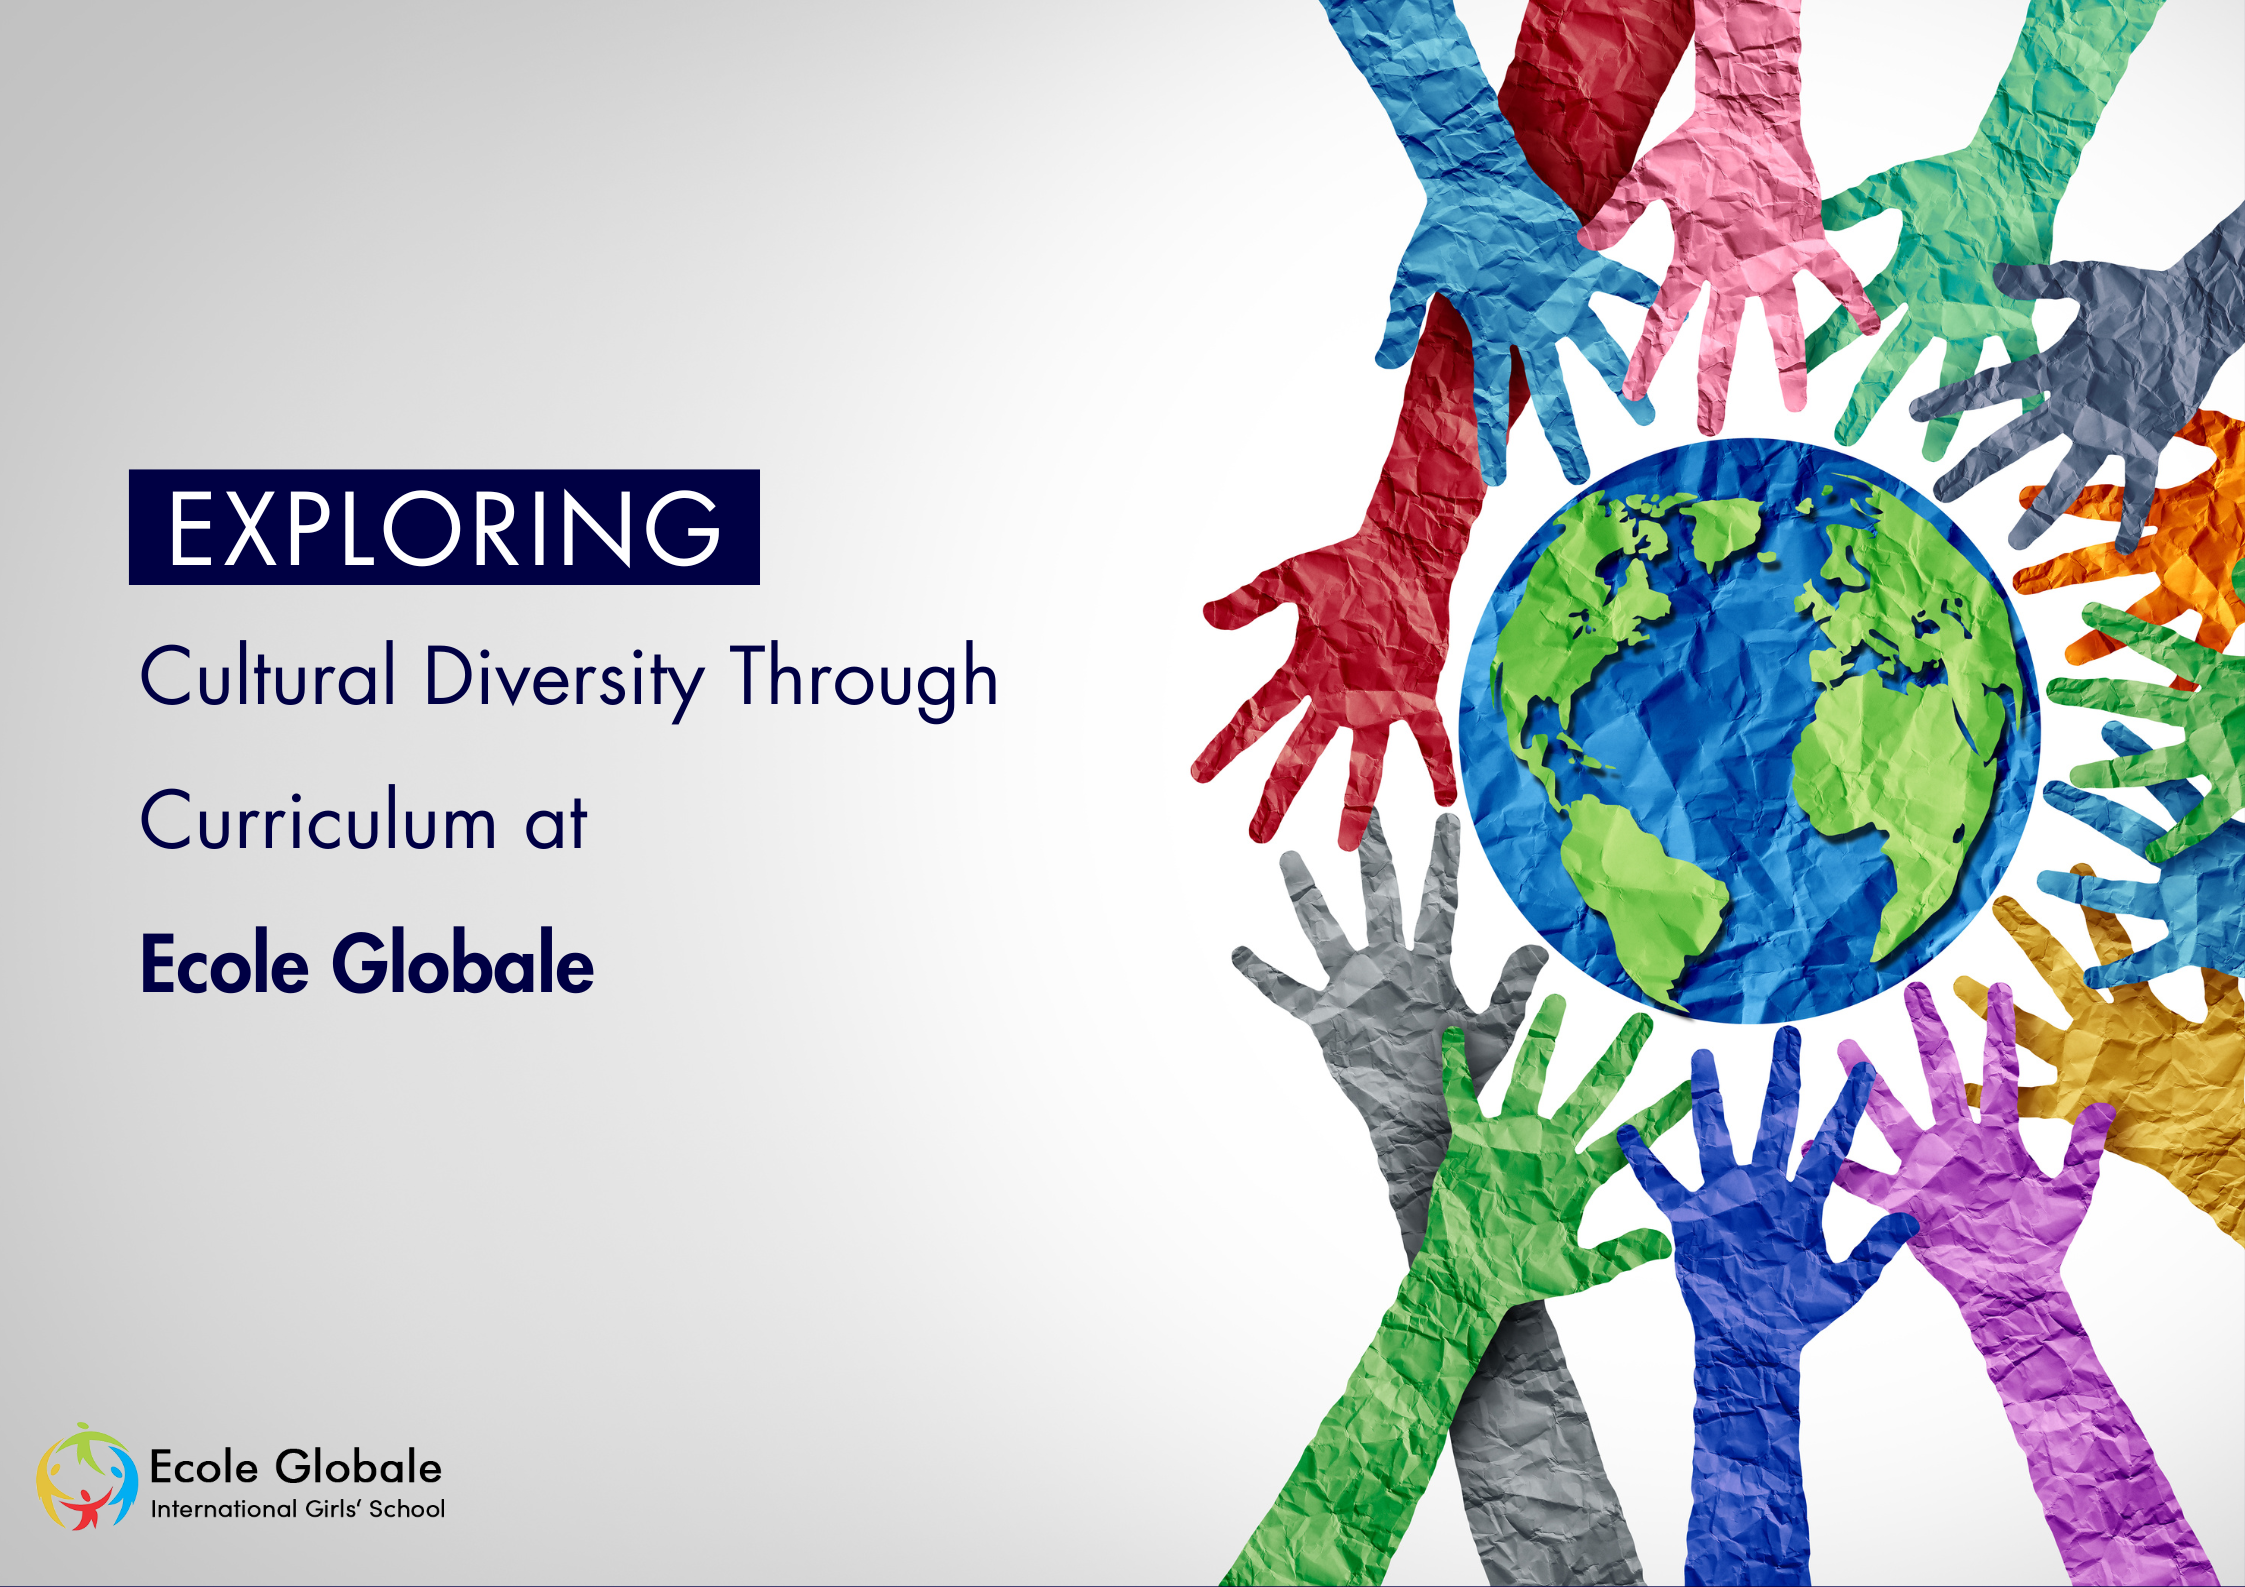 You are currently viewing Exploring Cultural Diversity Through Curriculum at Ecole Globale